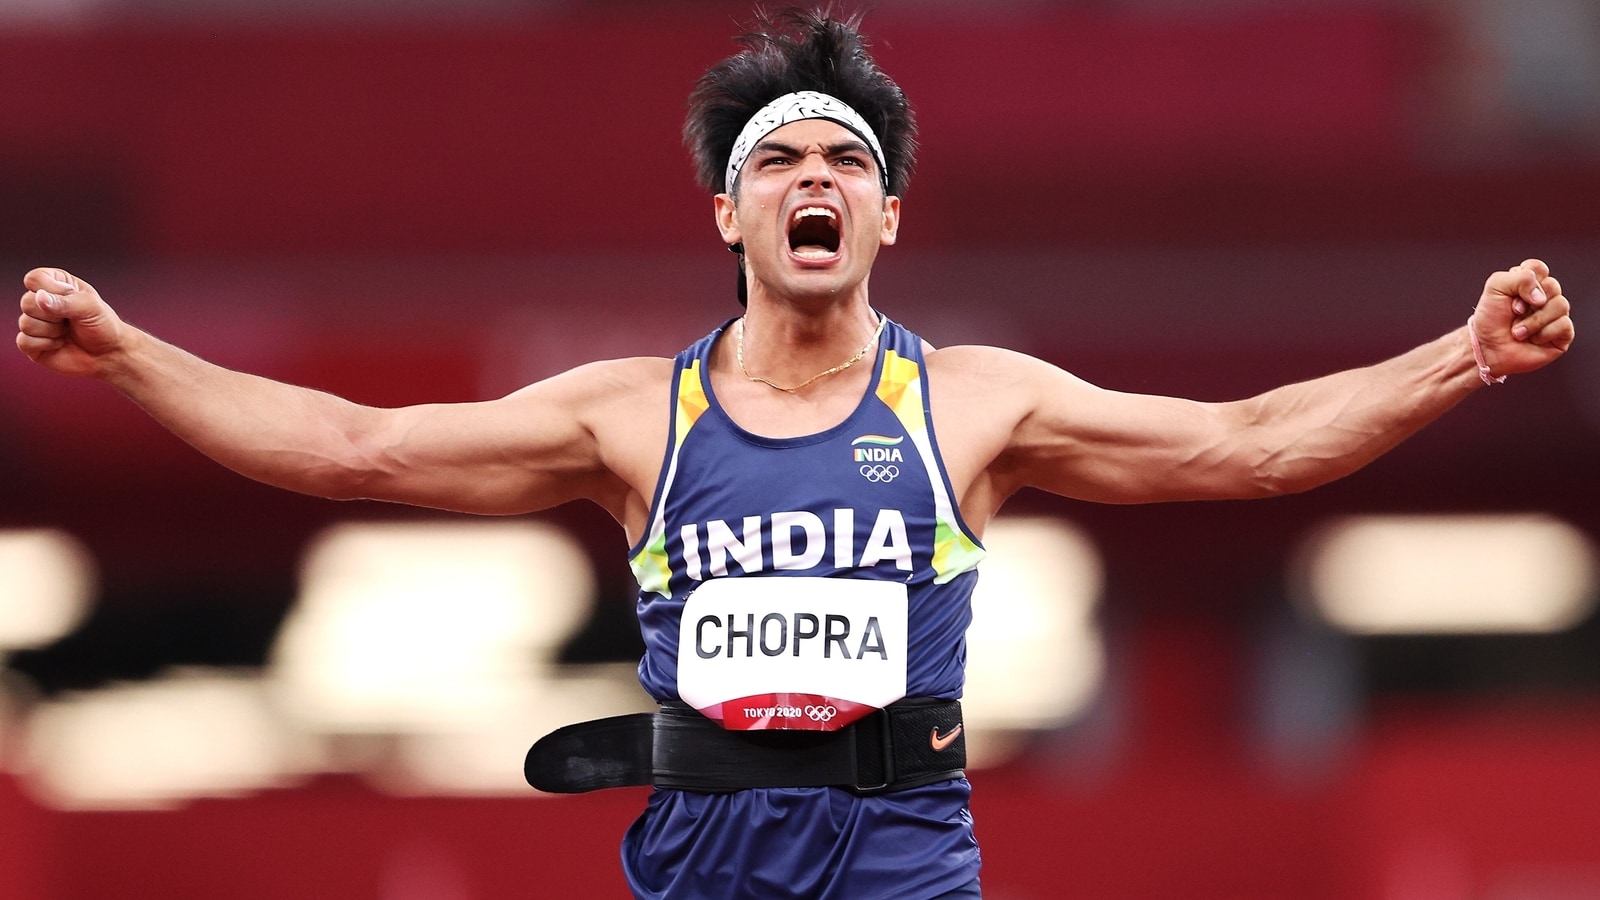 Bollywood cheers for Neeraj Chopra's historic gold medal at Tokyo Olympics: 'More power to you'